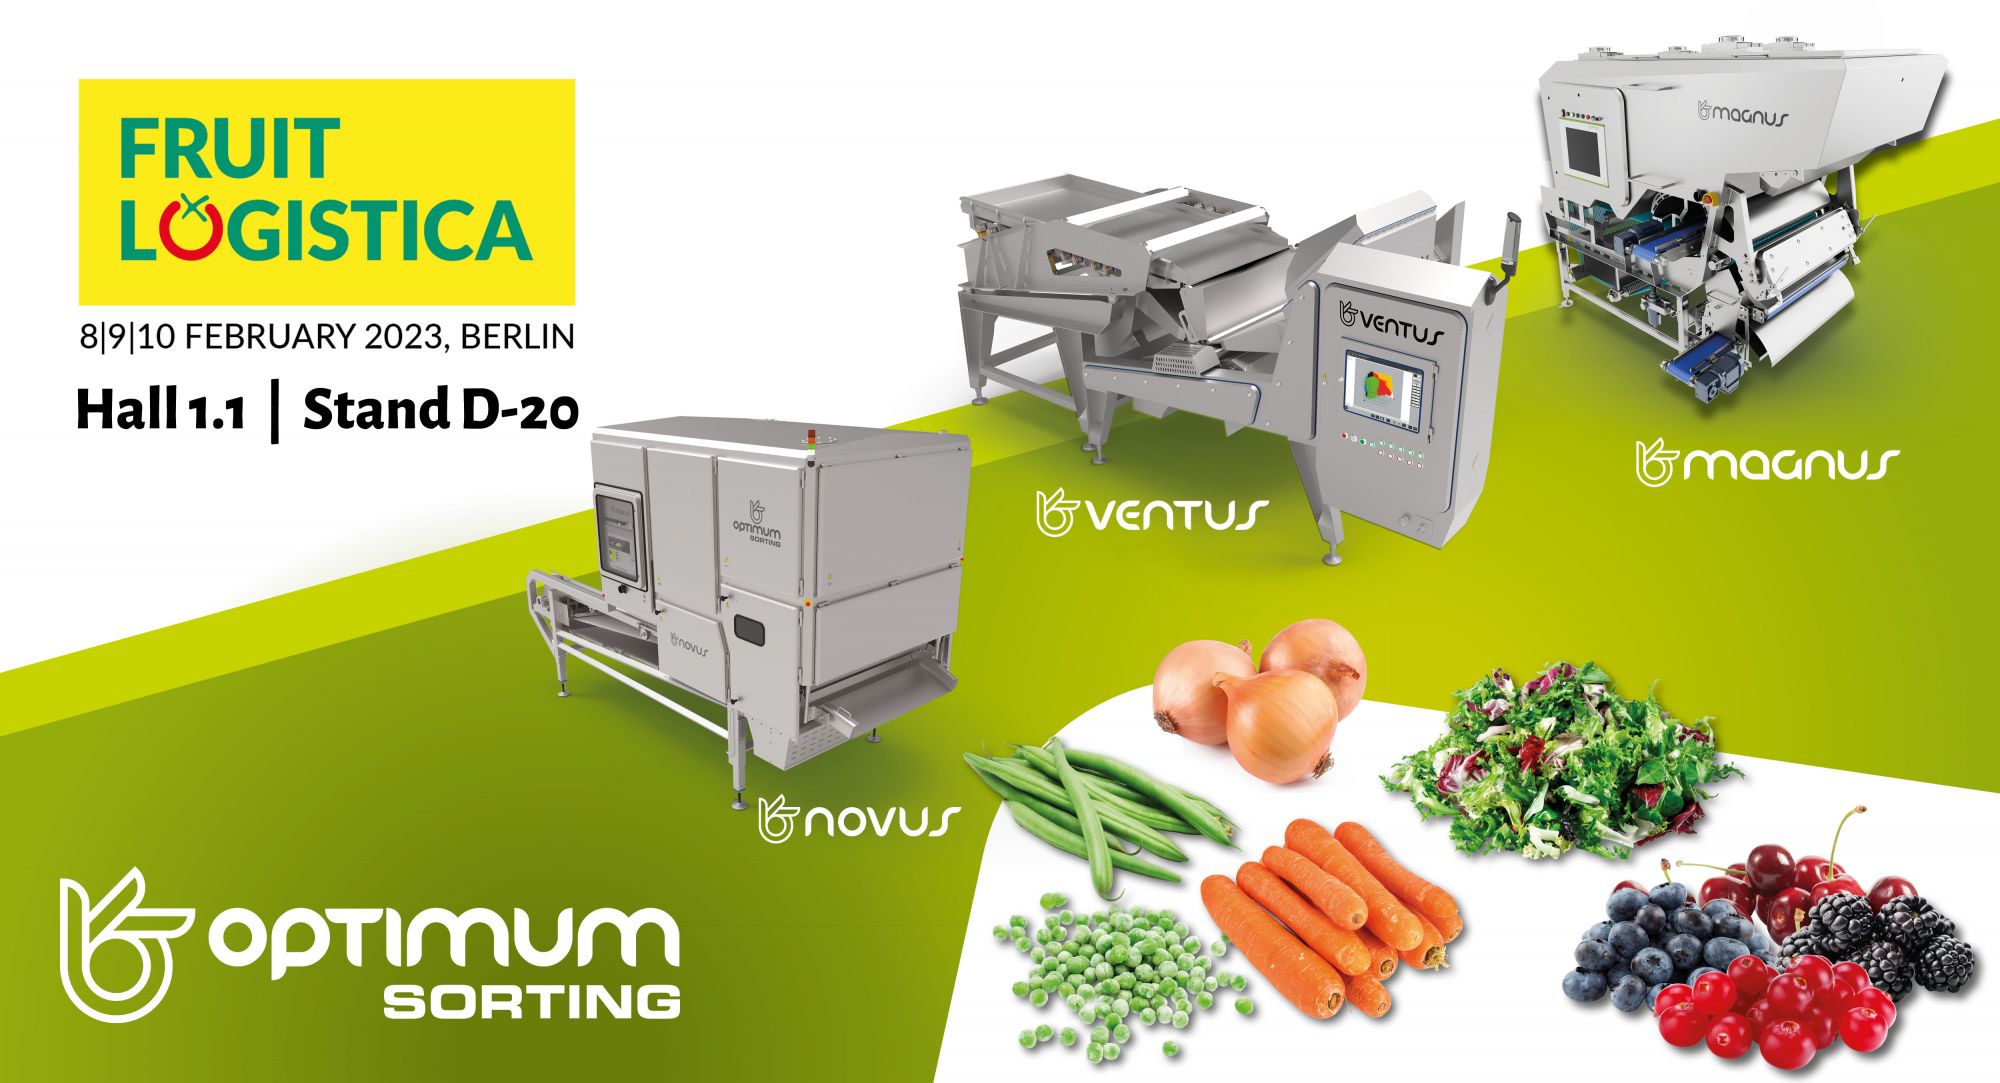 Come and visit us at Fruit Logistica 2023!